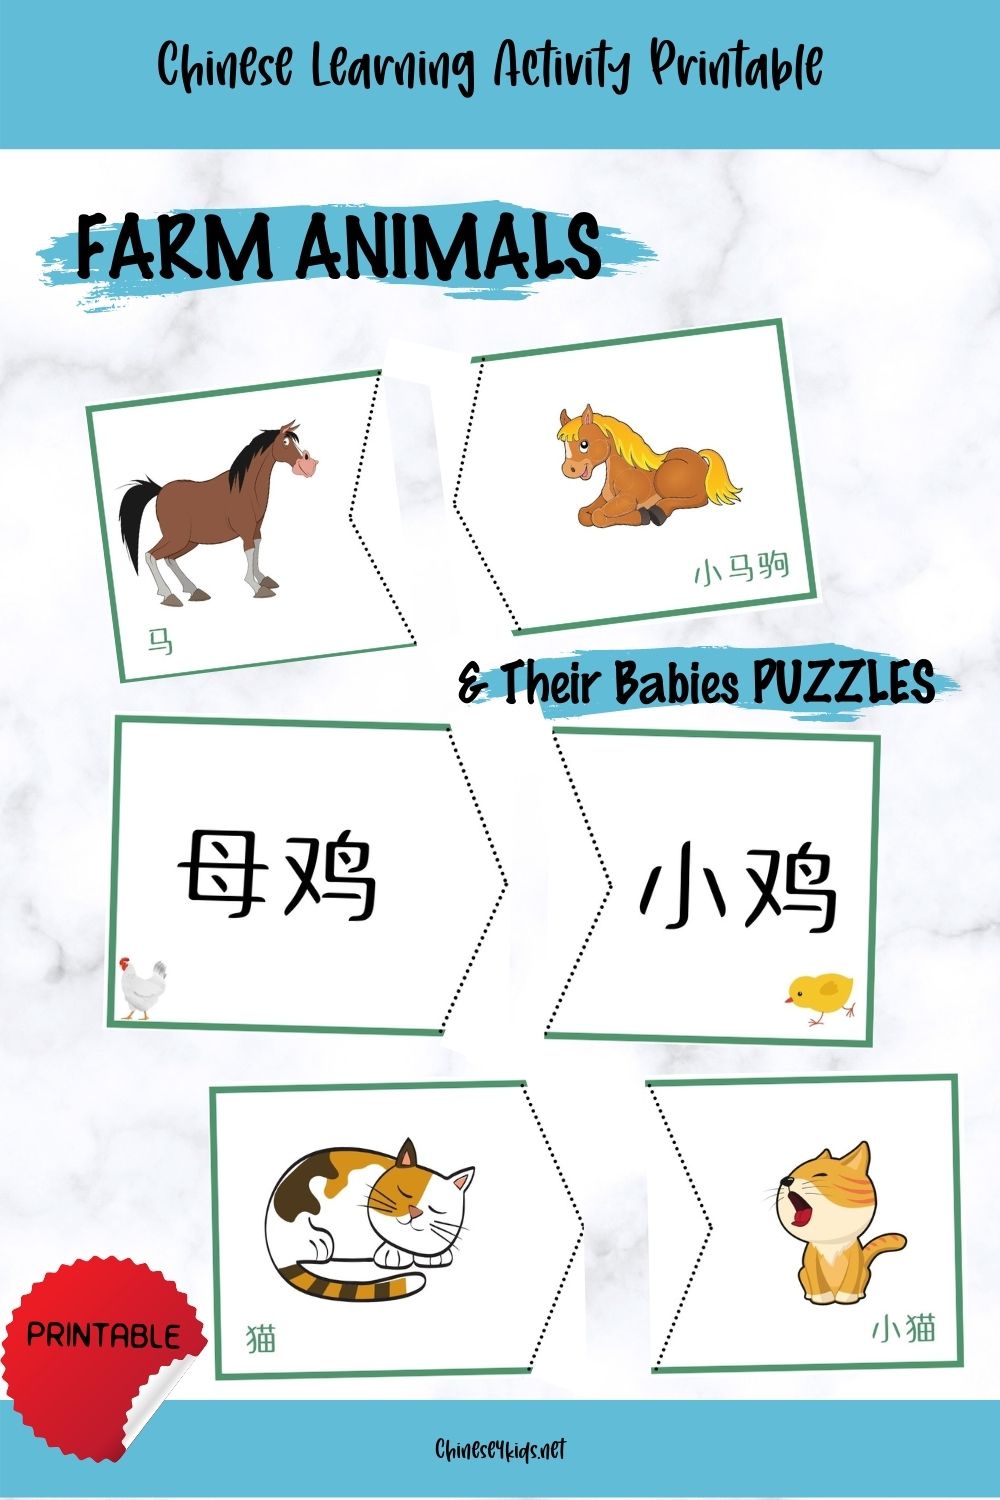 Farm Animals and their Babies Puzzle Activity for kids - Learning Chinese is fun with puzzle game #Chinese4kids #learnChinese #Chineseactivity #farmanimals #thematiclearning